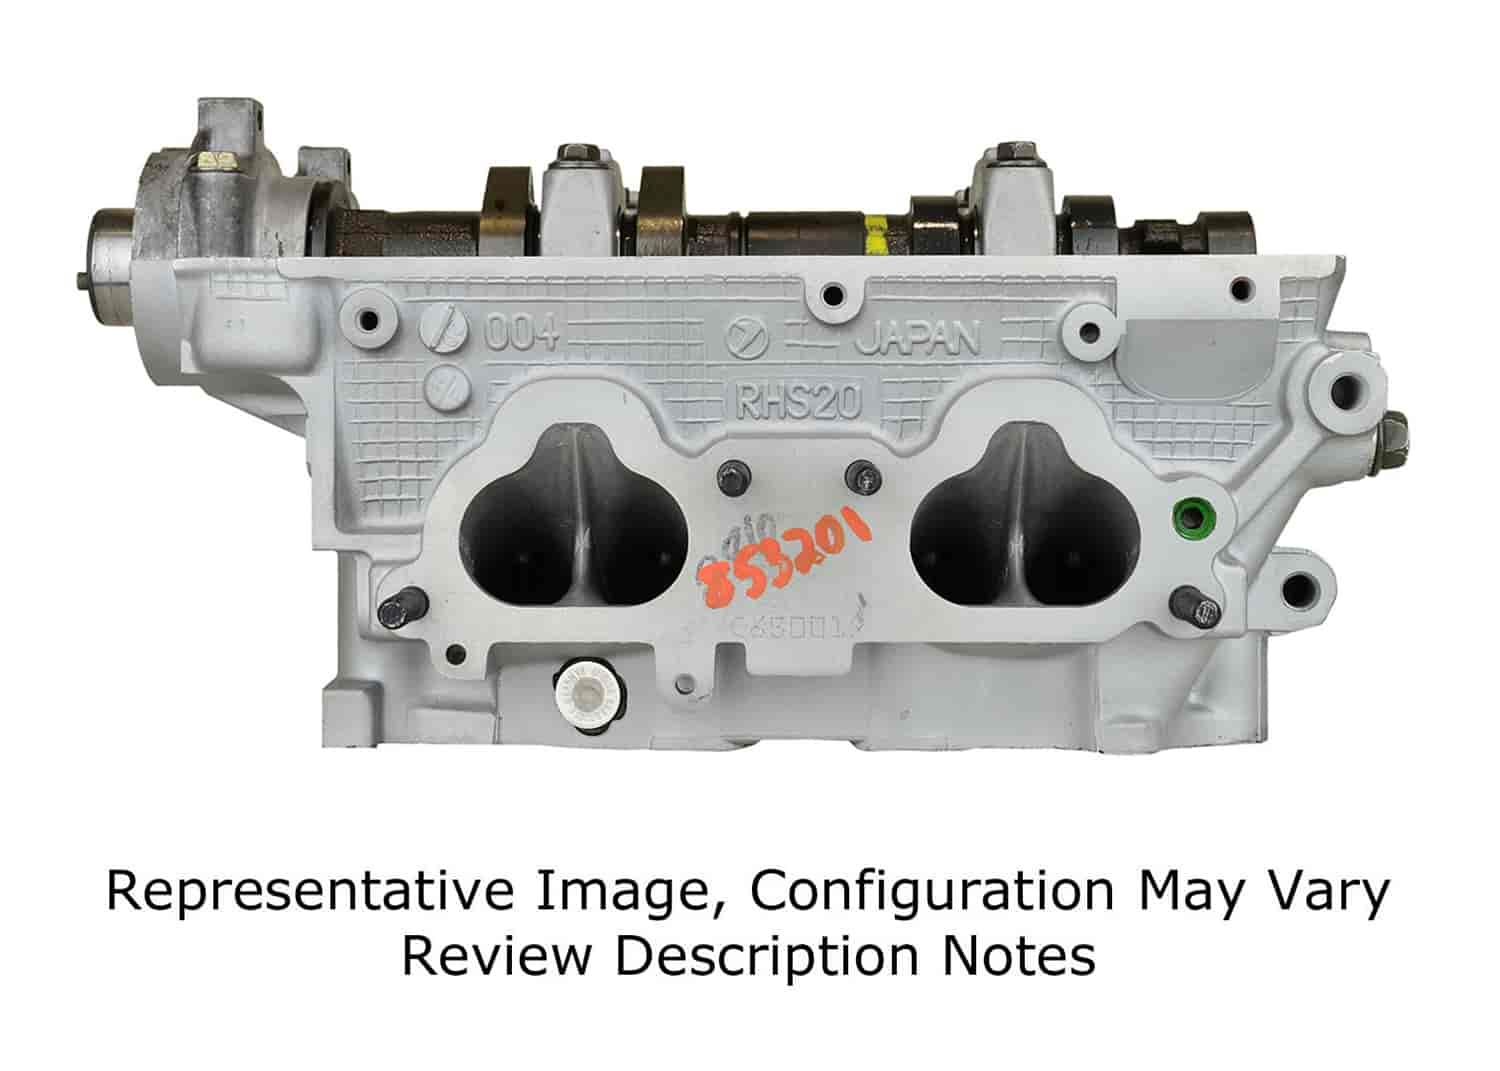 Remanufactured Cylinder Head for 2002-2005 Subaru/Saab with Turbocharged 2.0L H4